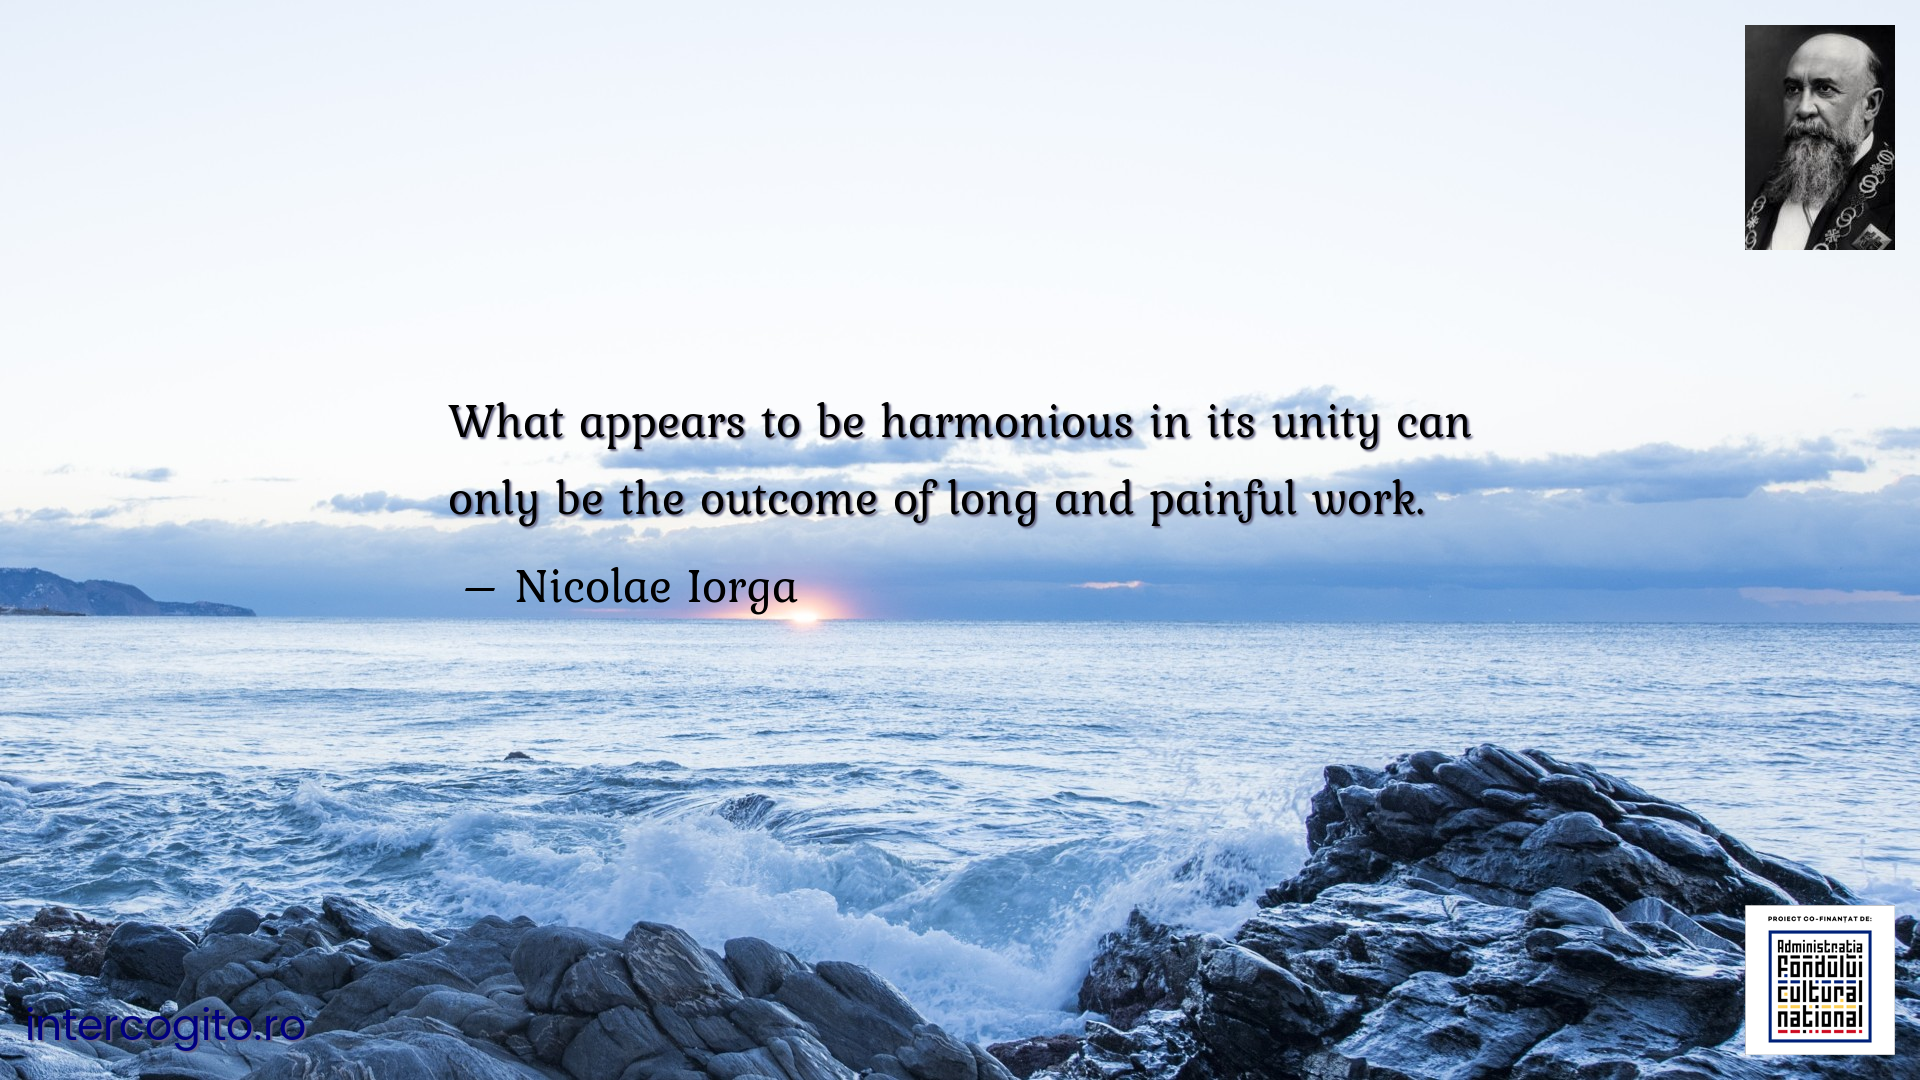 What appears to be harmonious in its unity can only be the outcome of long and painful work.